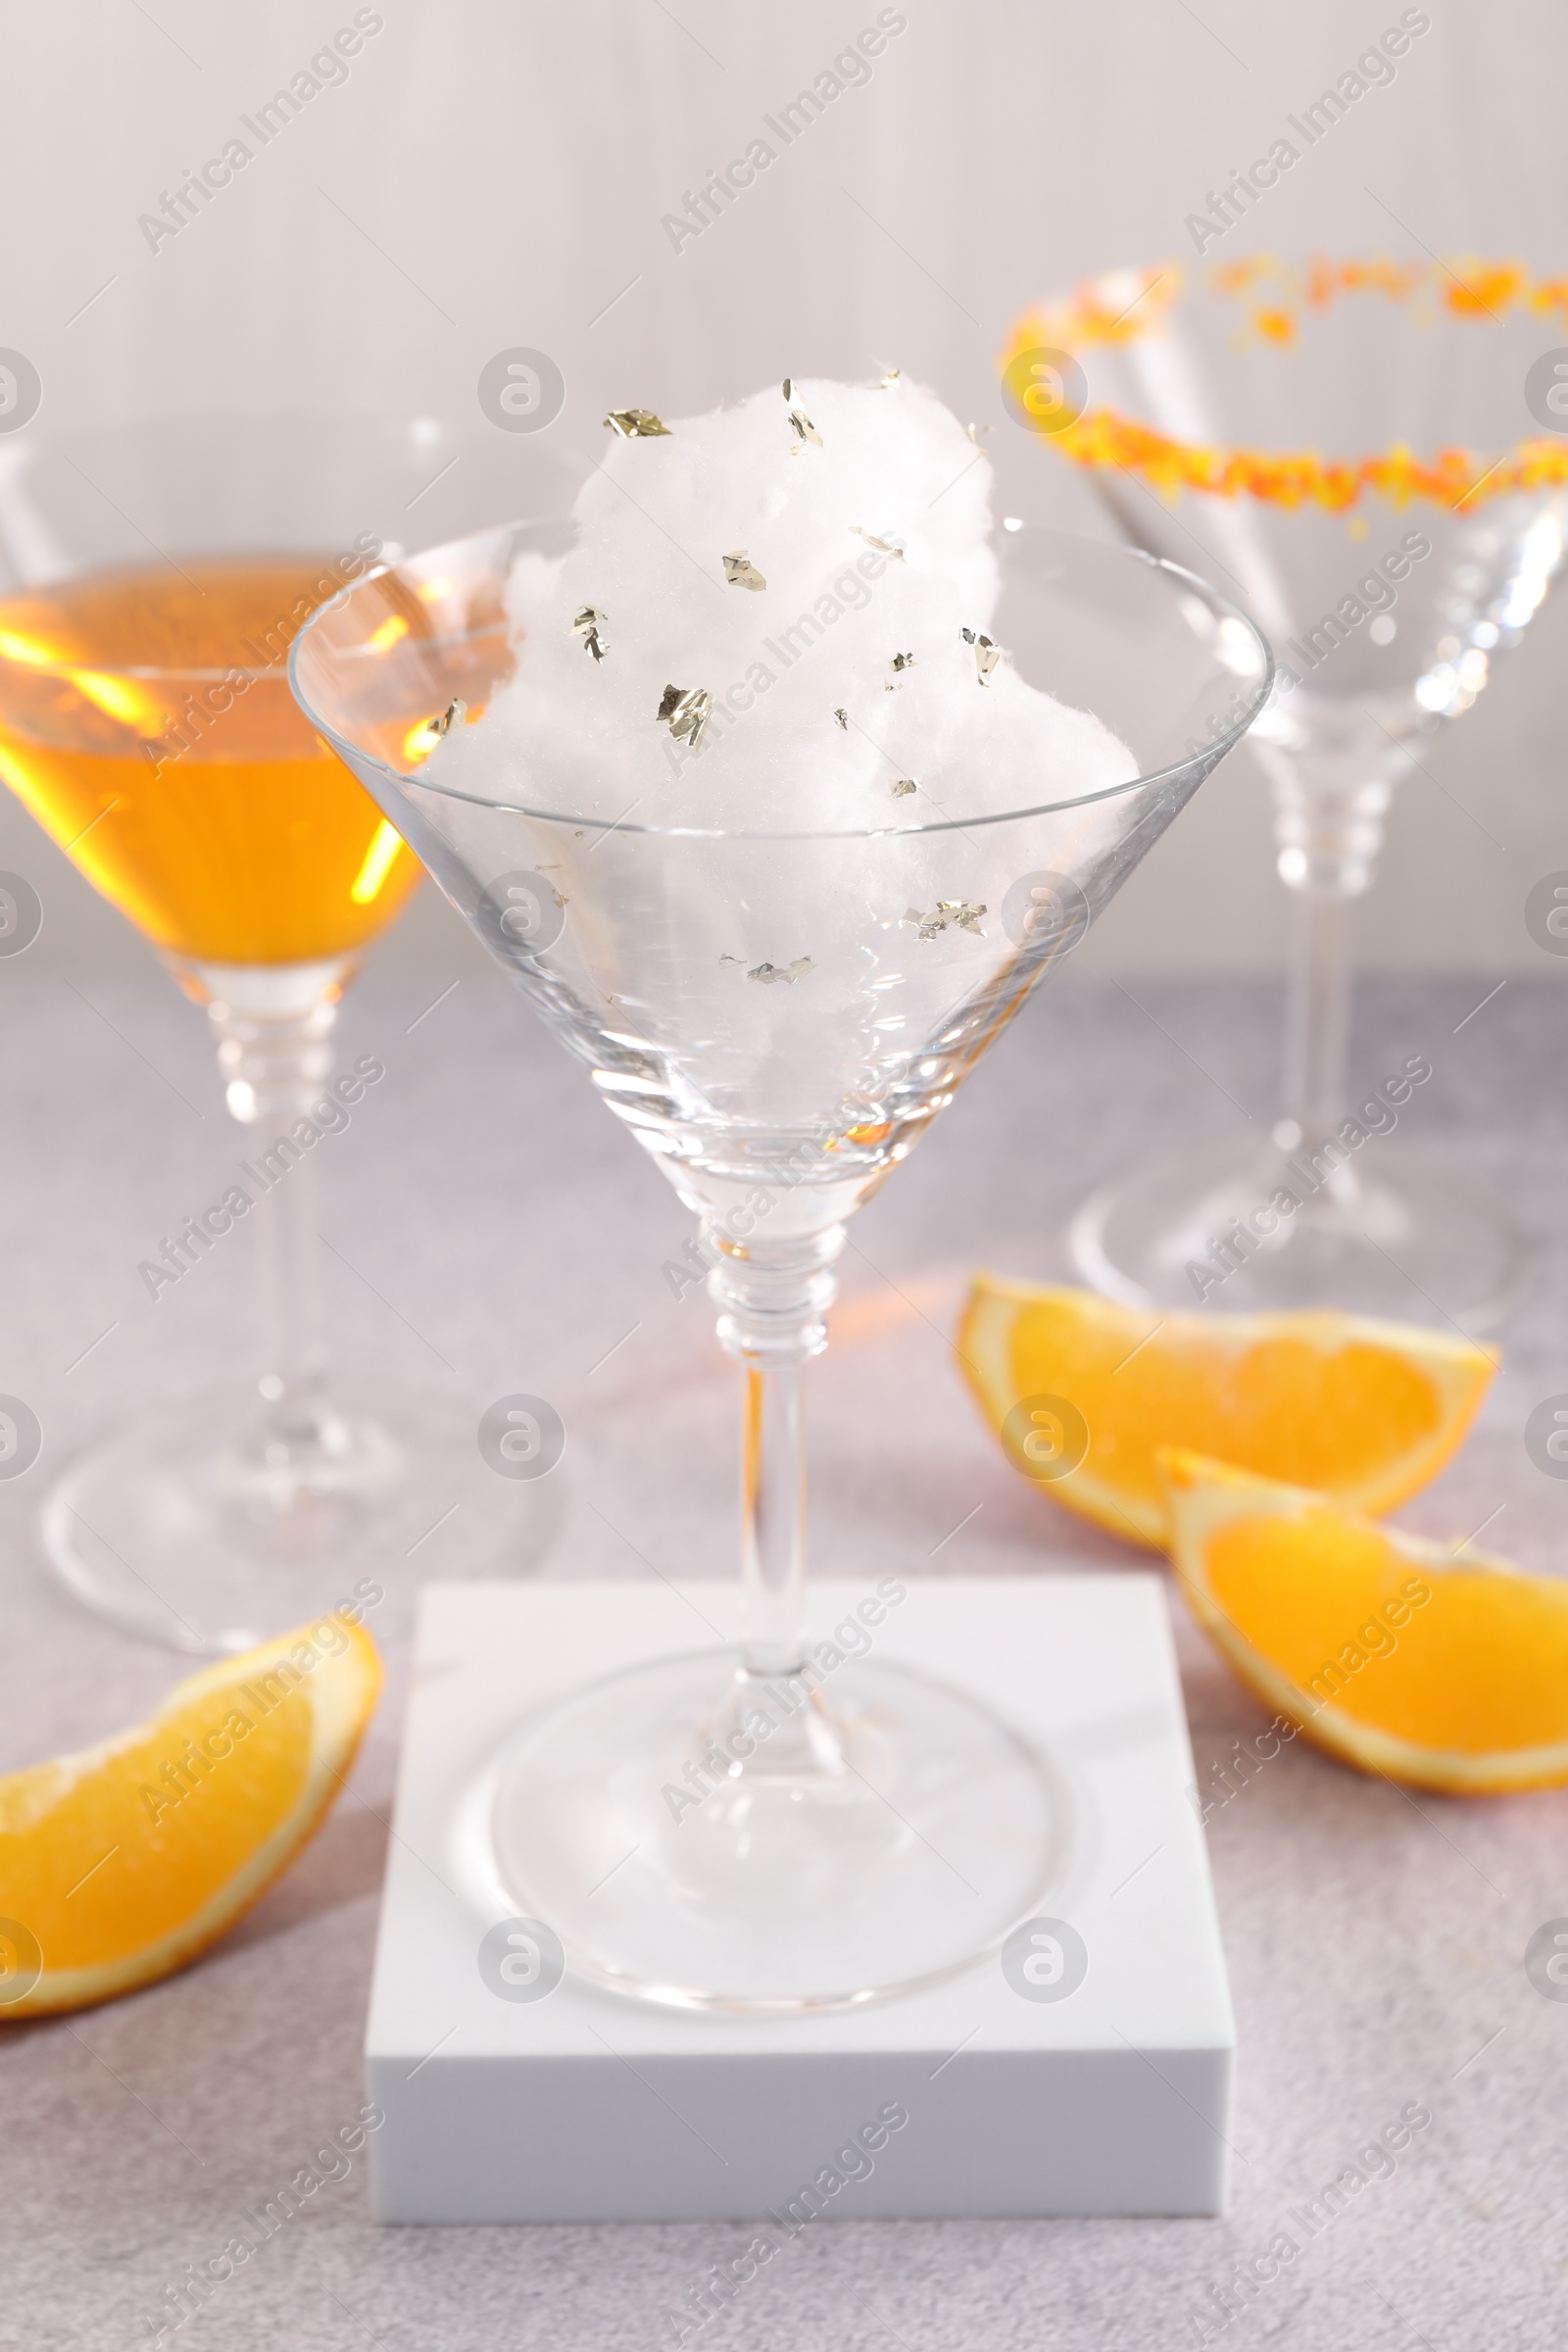 Photo of Tasty cotton candy cocktail in glass and other alcoholic drinks on gray table